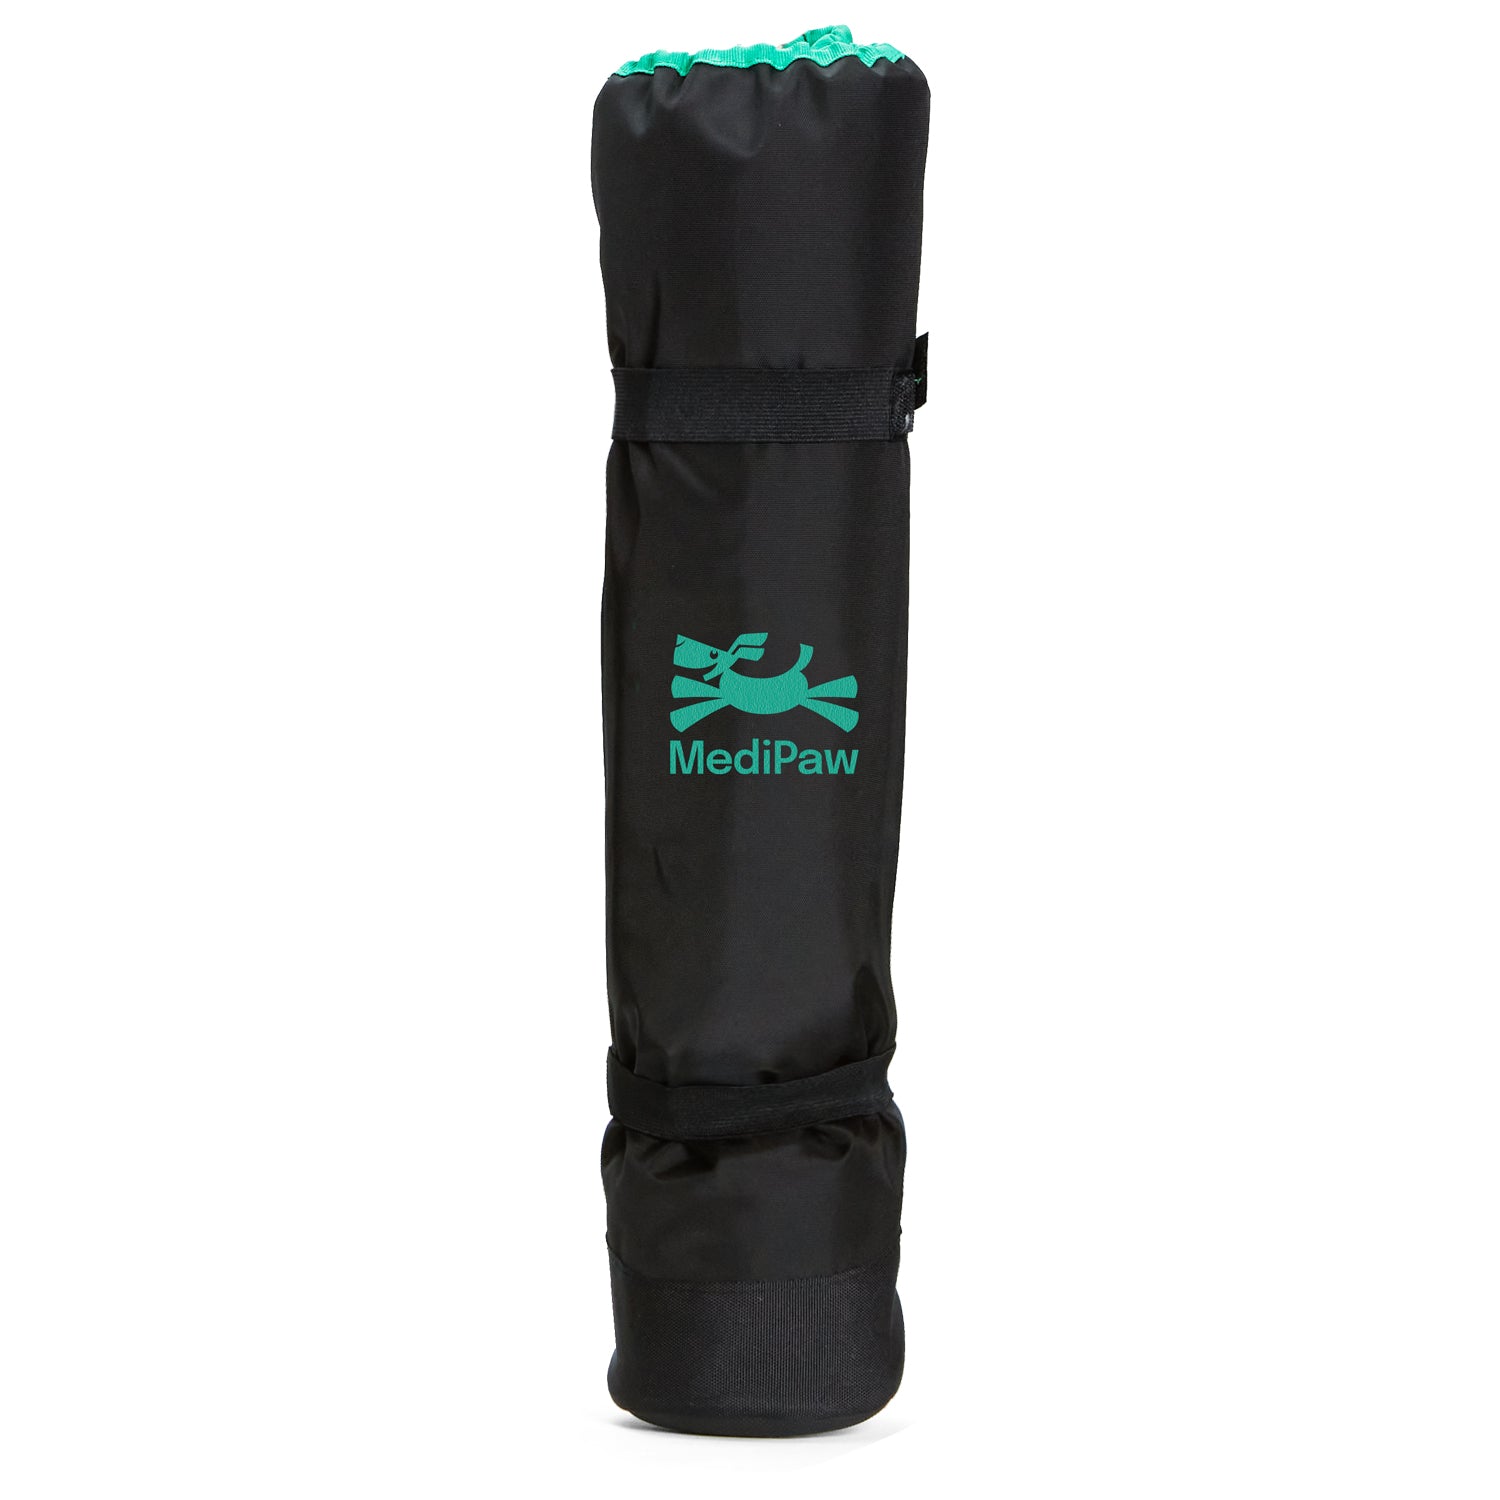 A MediPaw: Soft Bandage (Basic) Boot with a green logo on it.